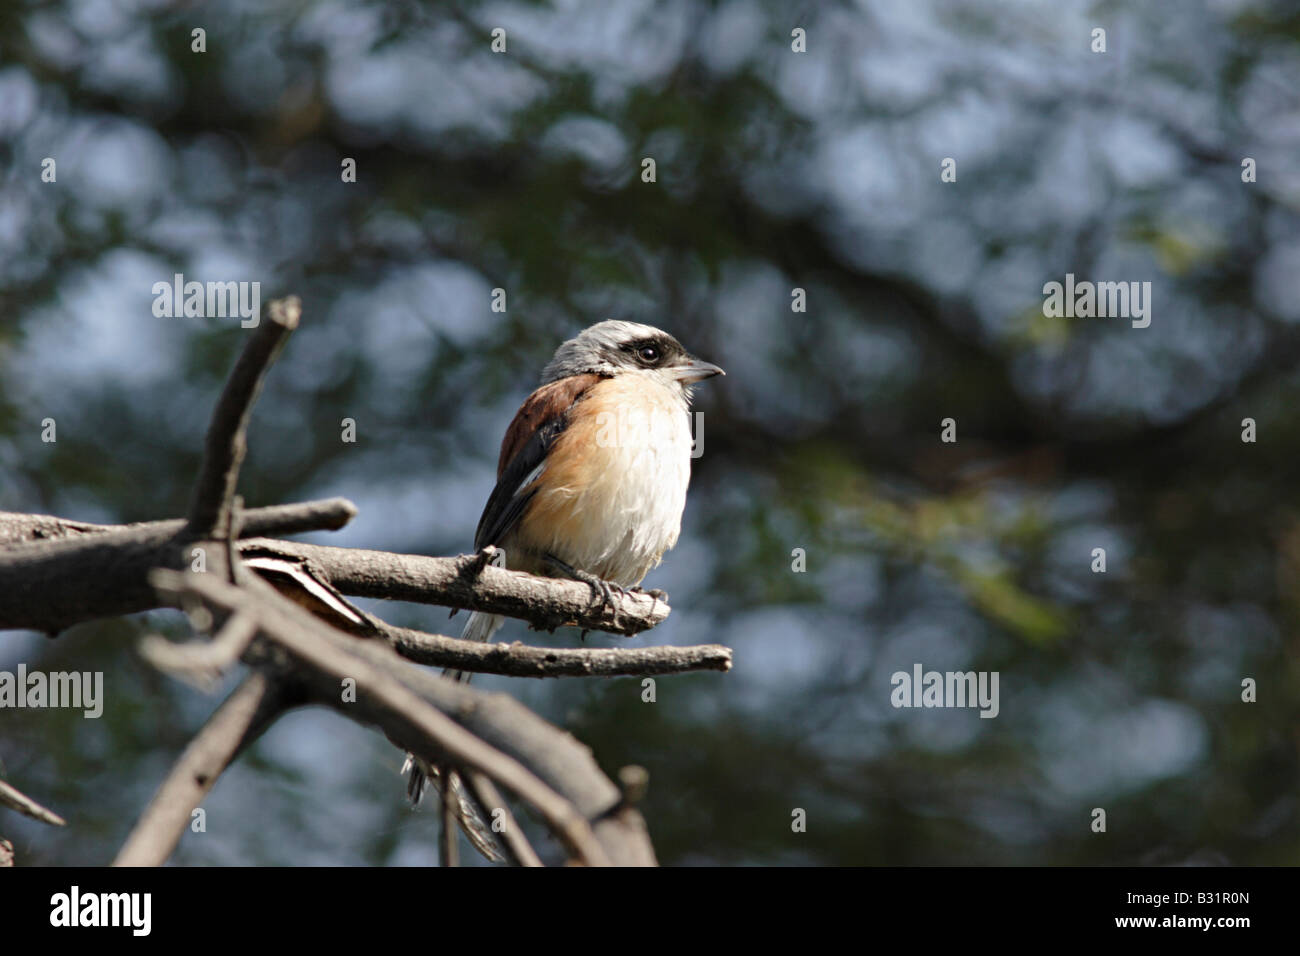 The Long-tailed Shrike or the Rufous-backed Shrike (Lanius schach) is a ...